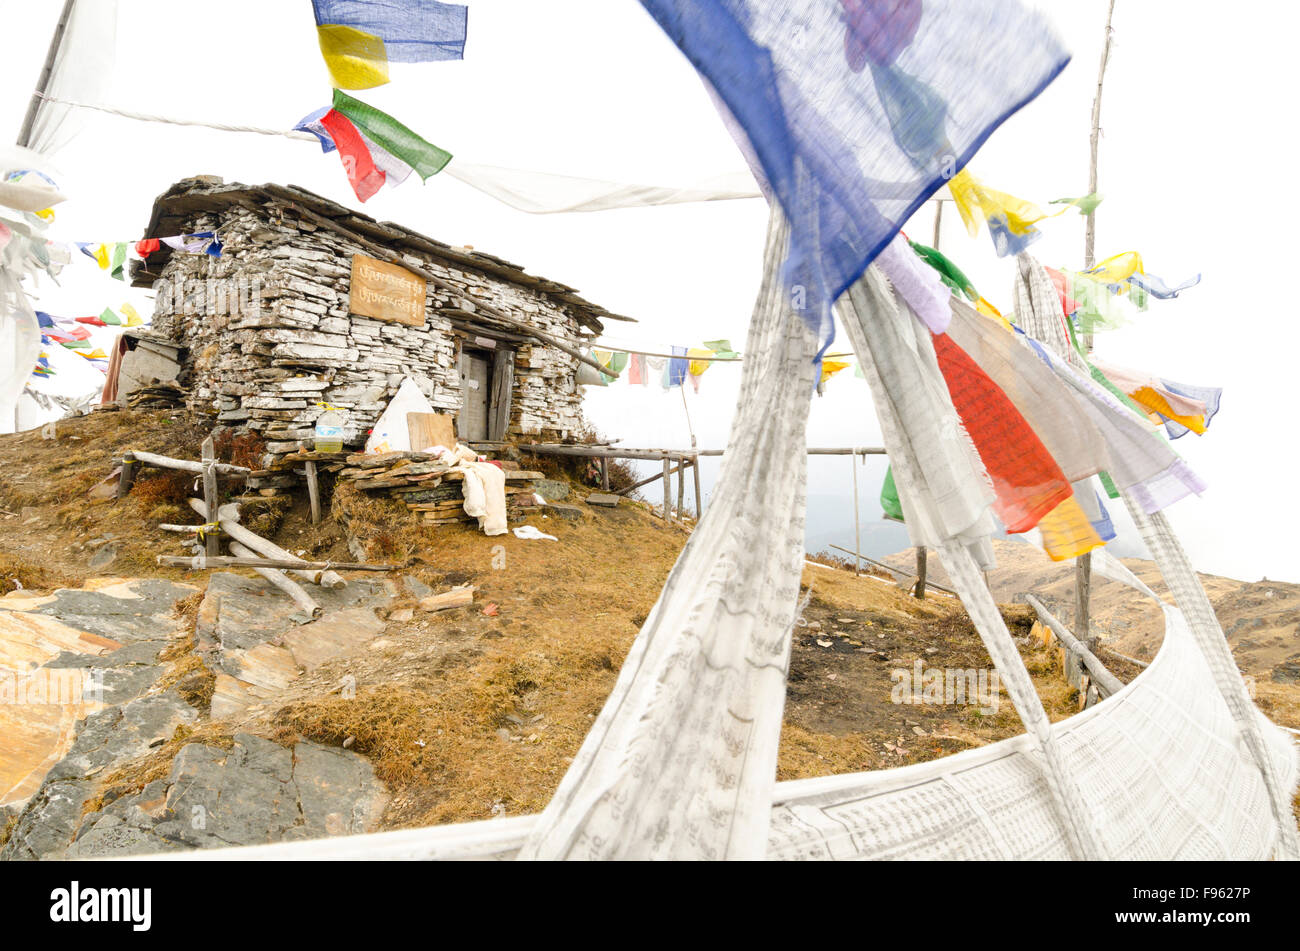 A sky burial monument showing prayer flags and the rack for tying down a human corpse, Bhutan Stock Photo